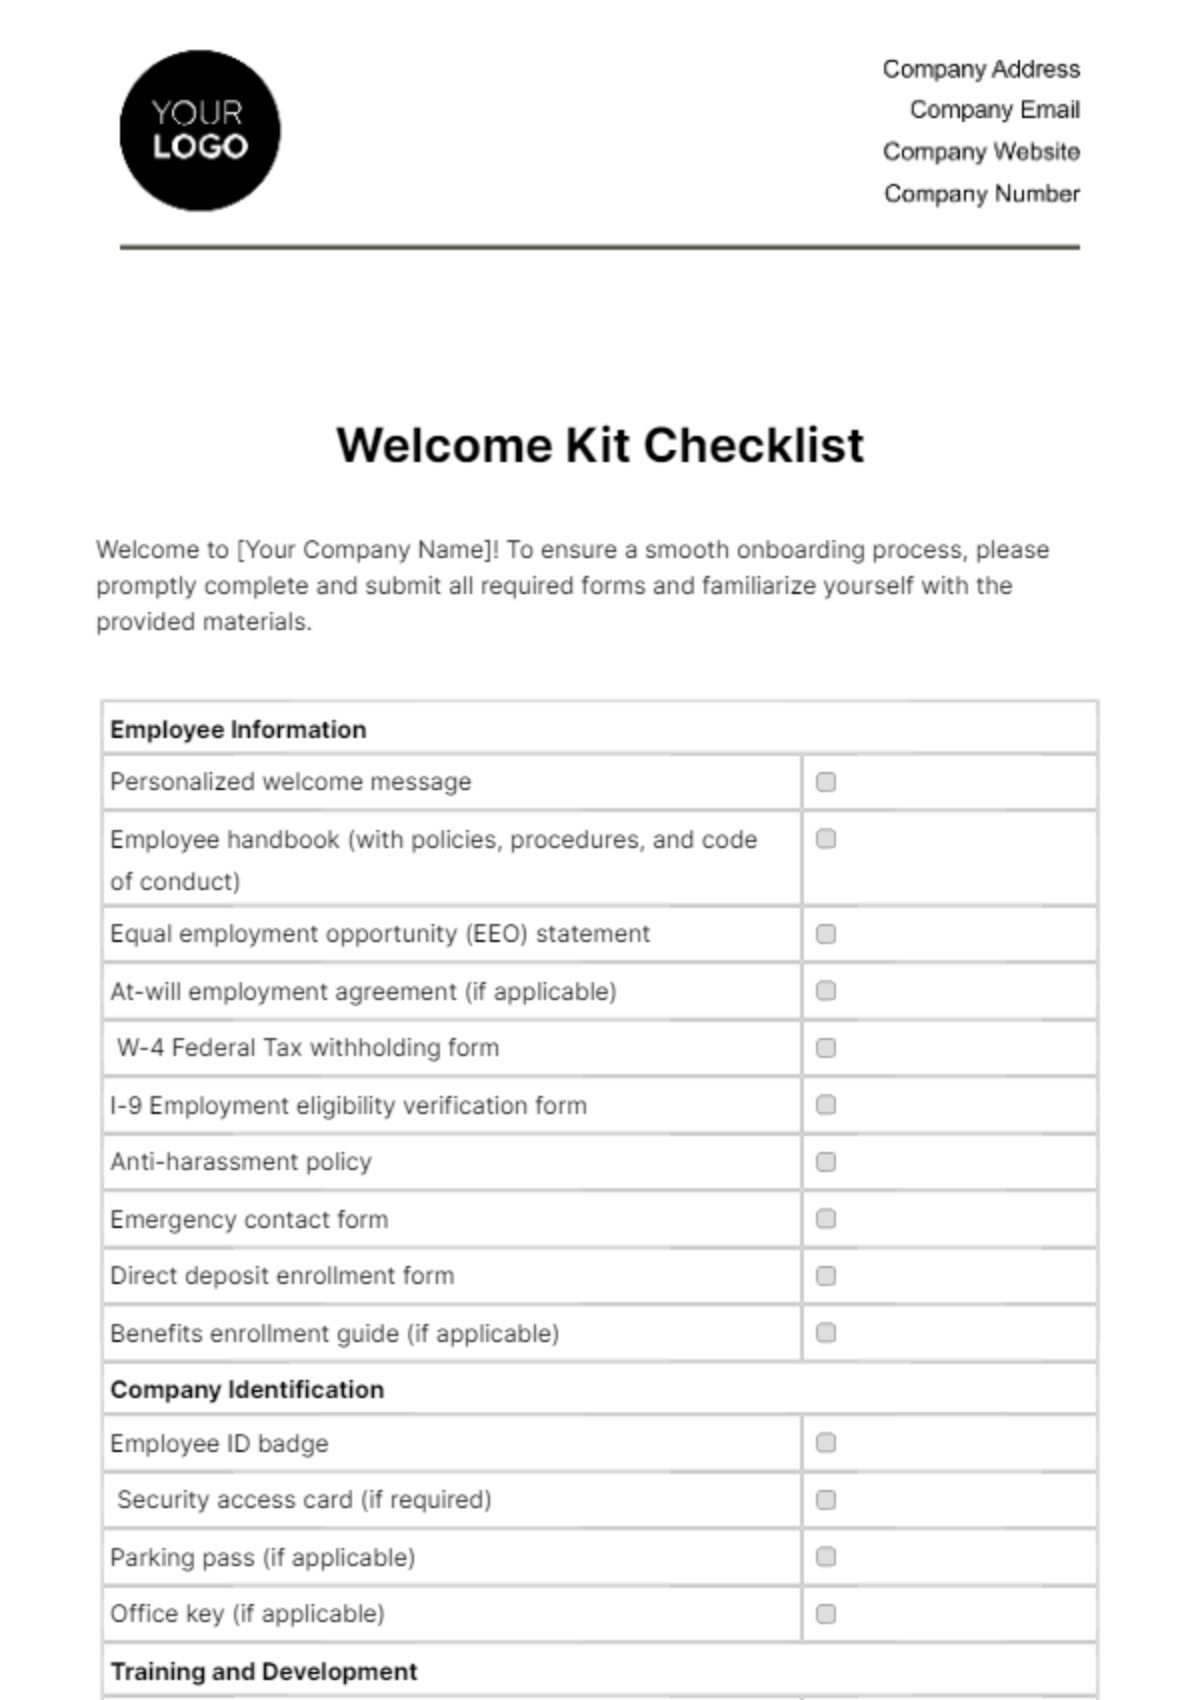 Free Welcome Kit Checklist HR Template